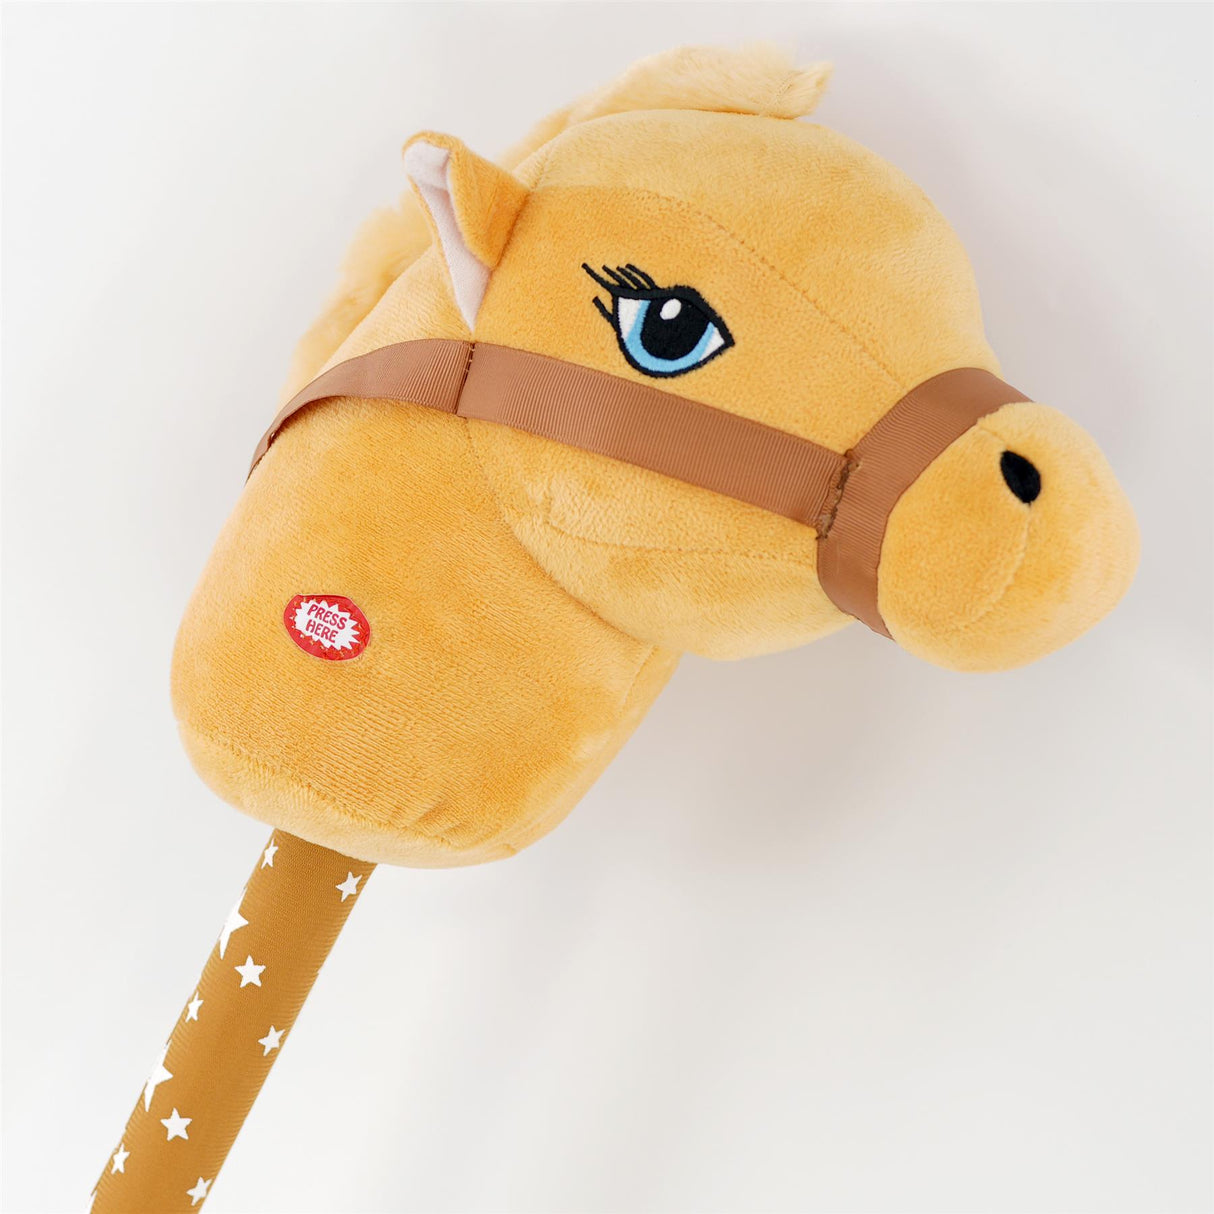 Kids Brown Hobby Horse With Sounds by The Magic Toy Shop - UKBuyZone